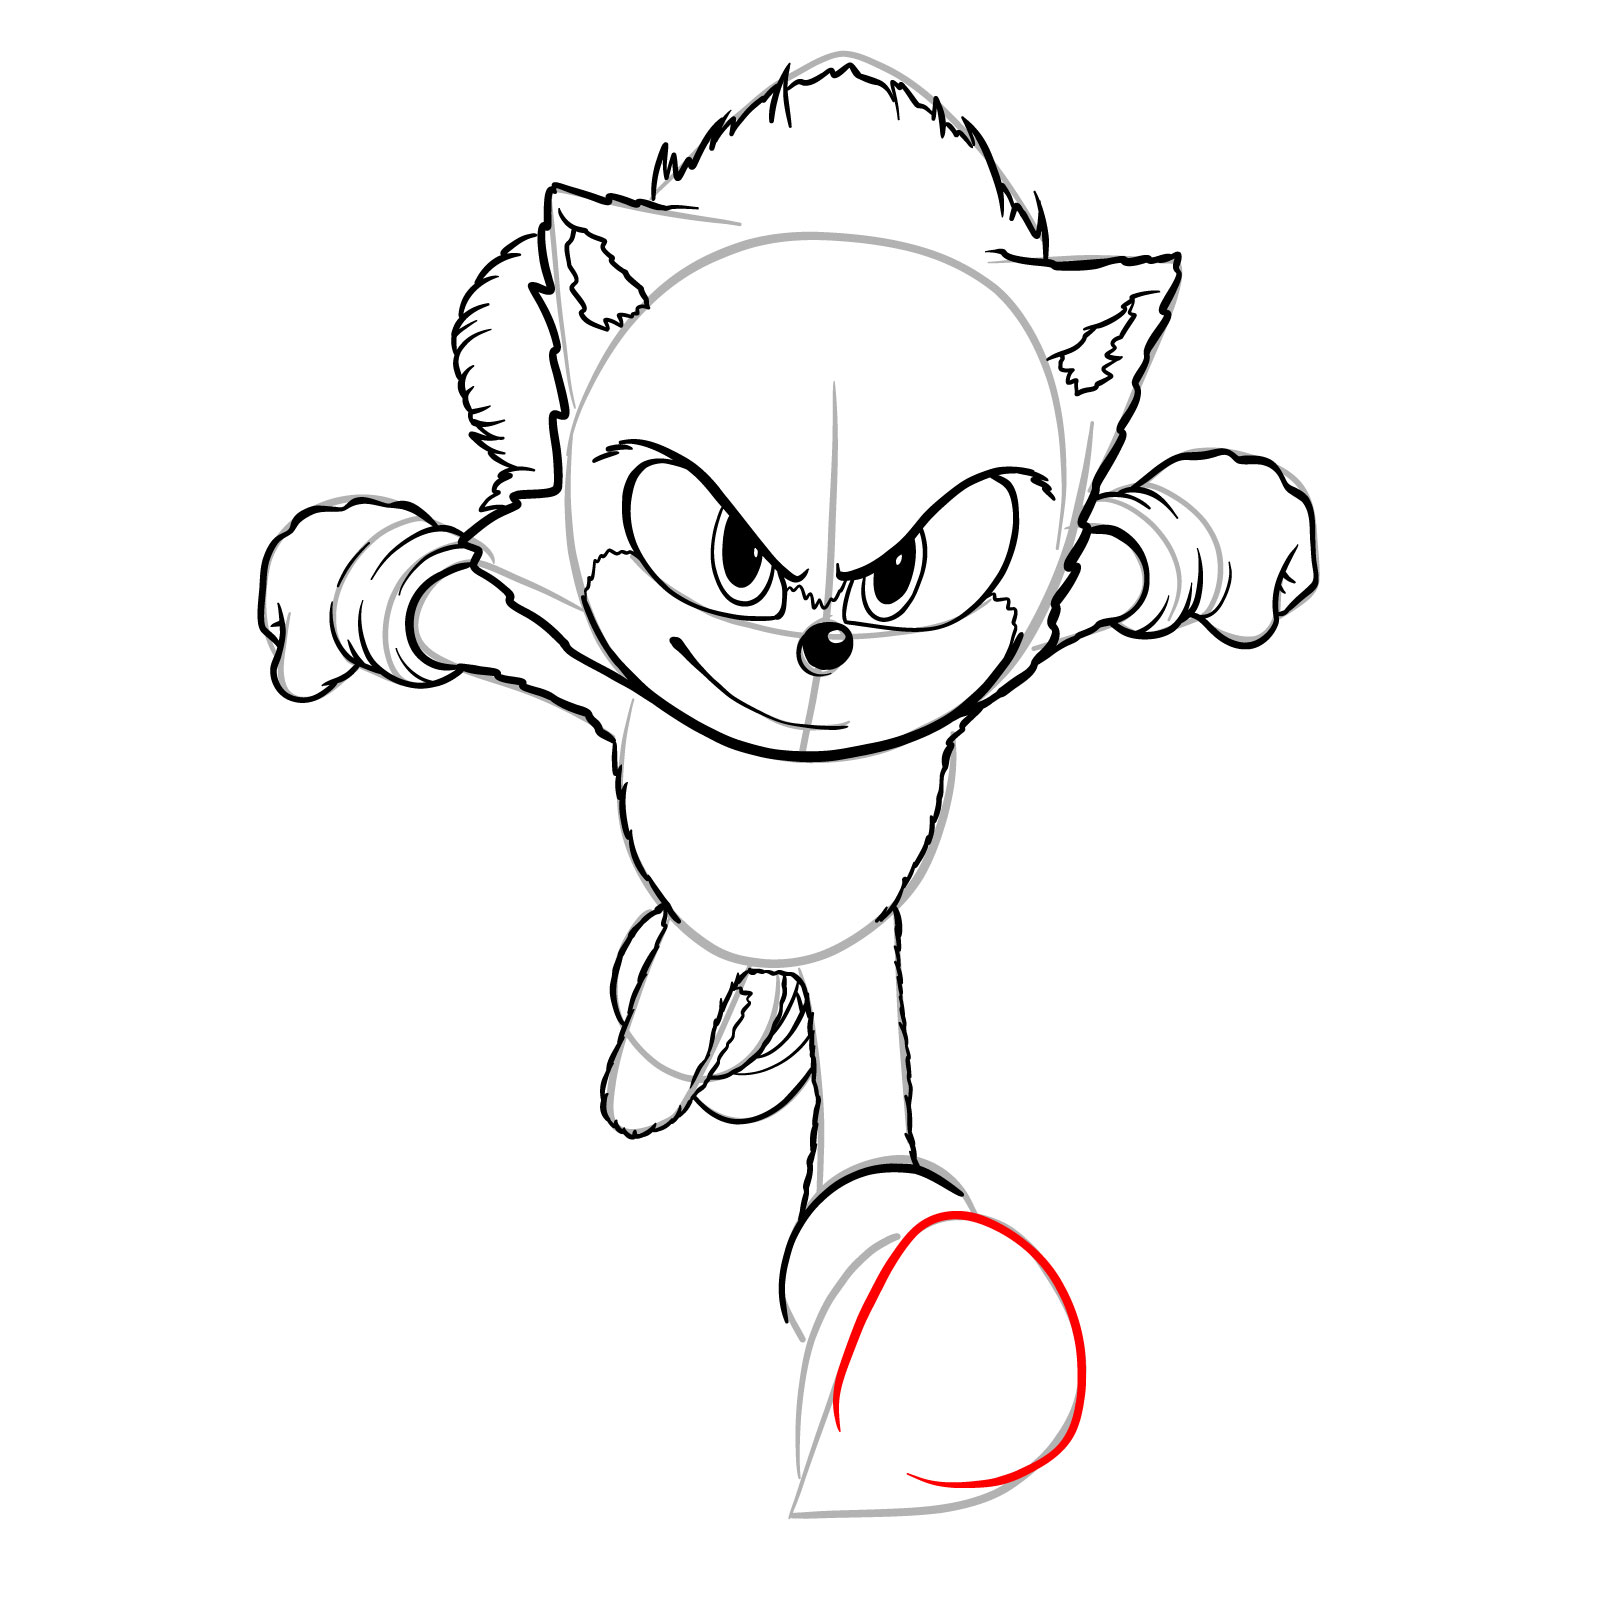 How to draw Sonic from the movie - step 25